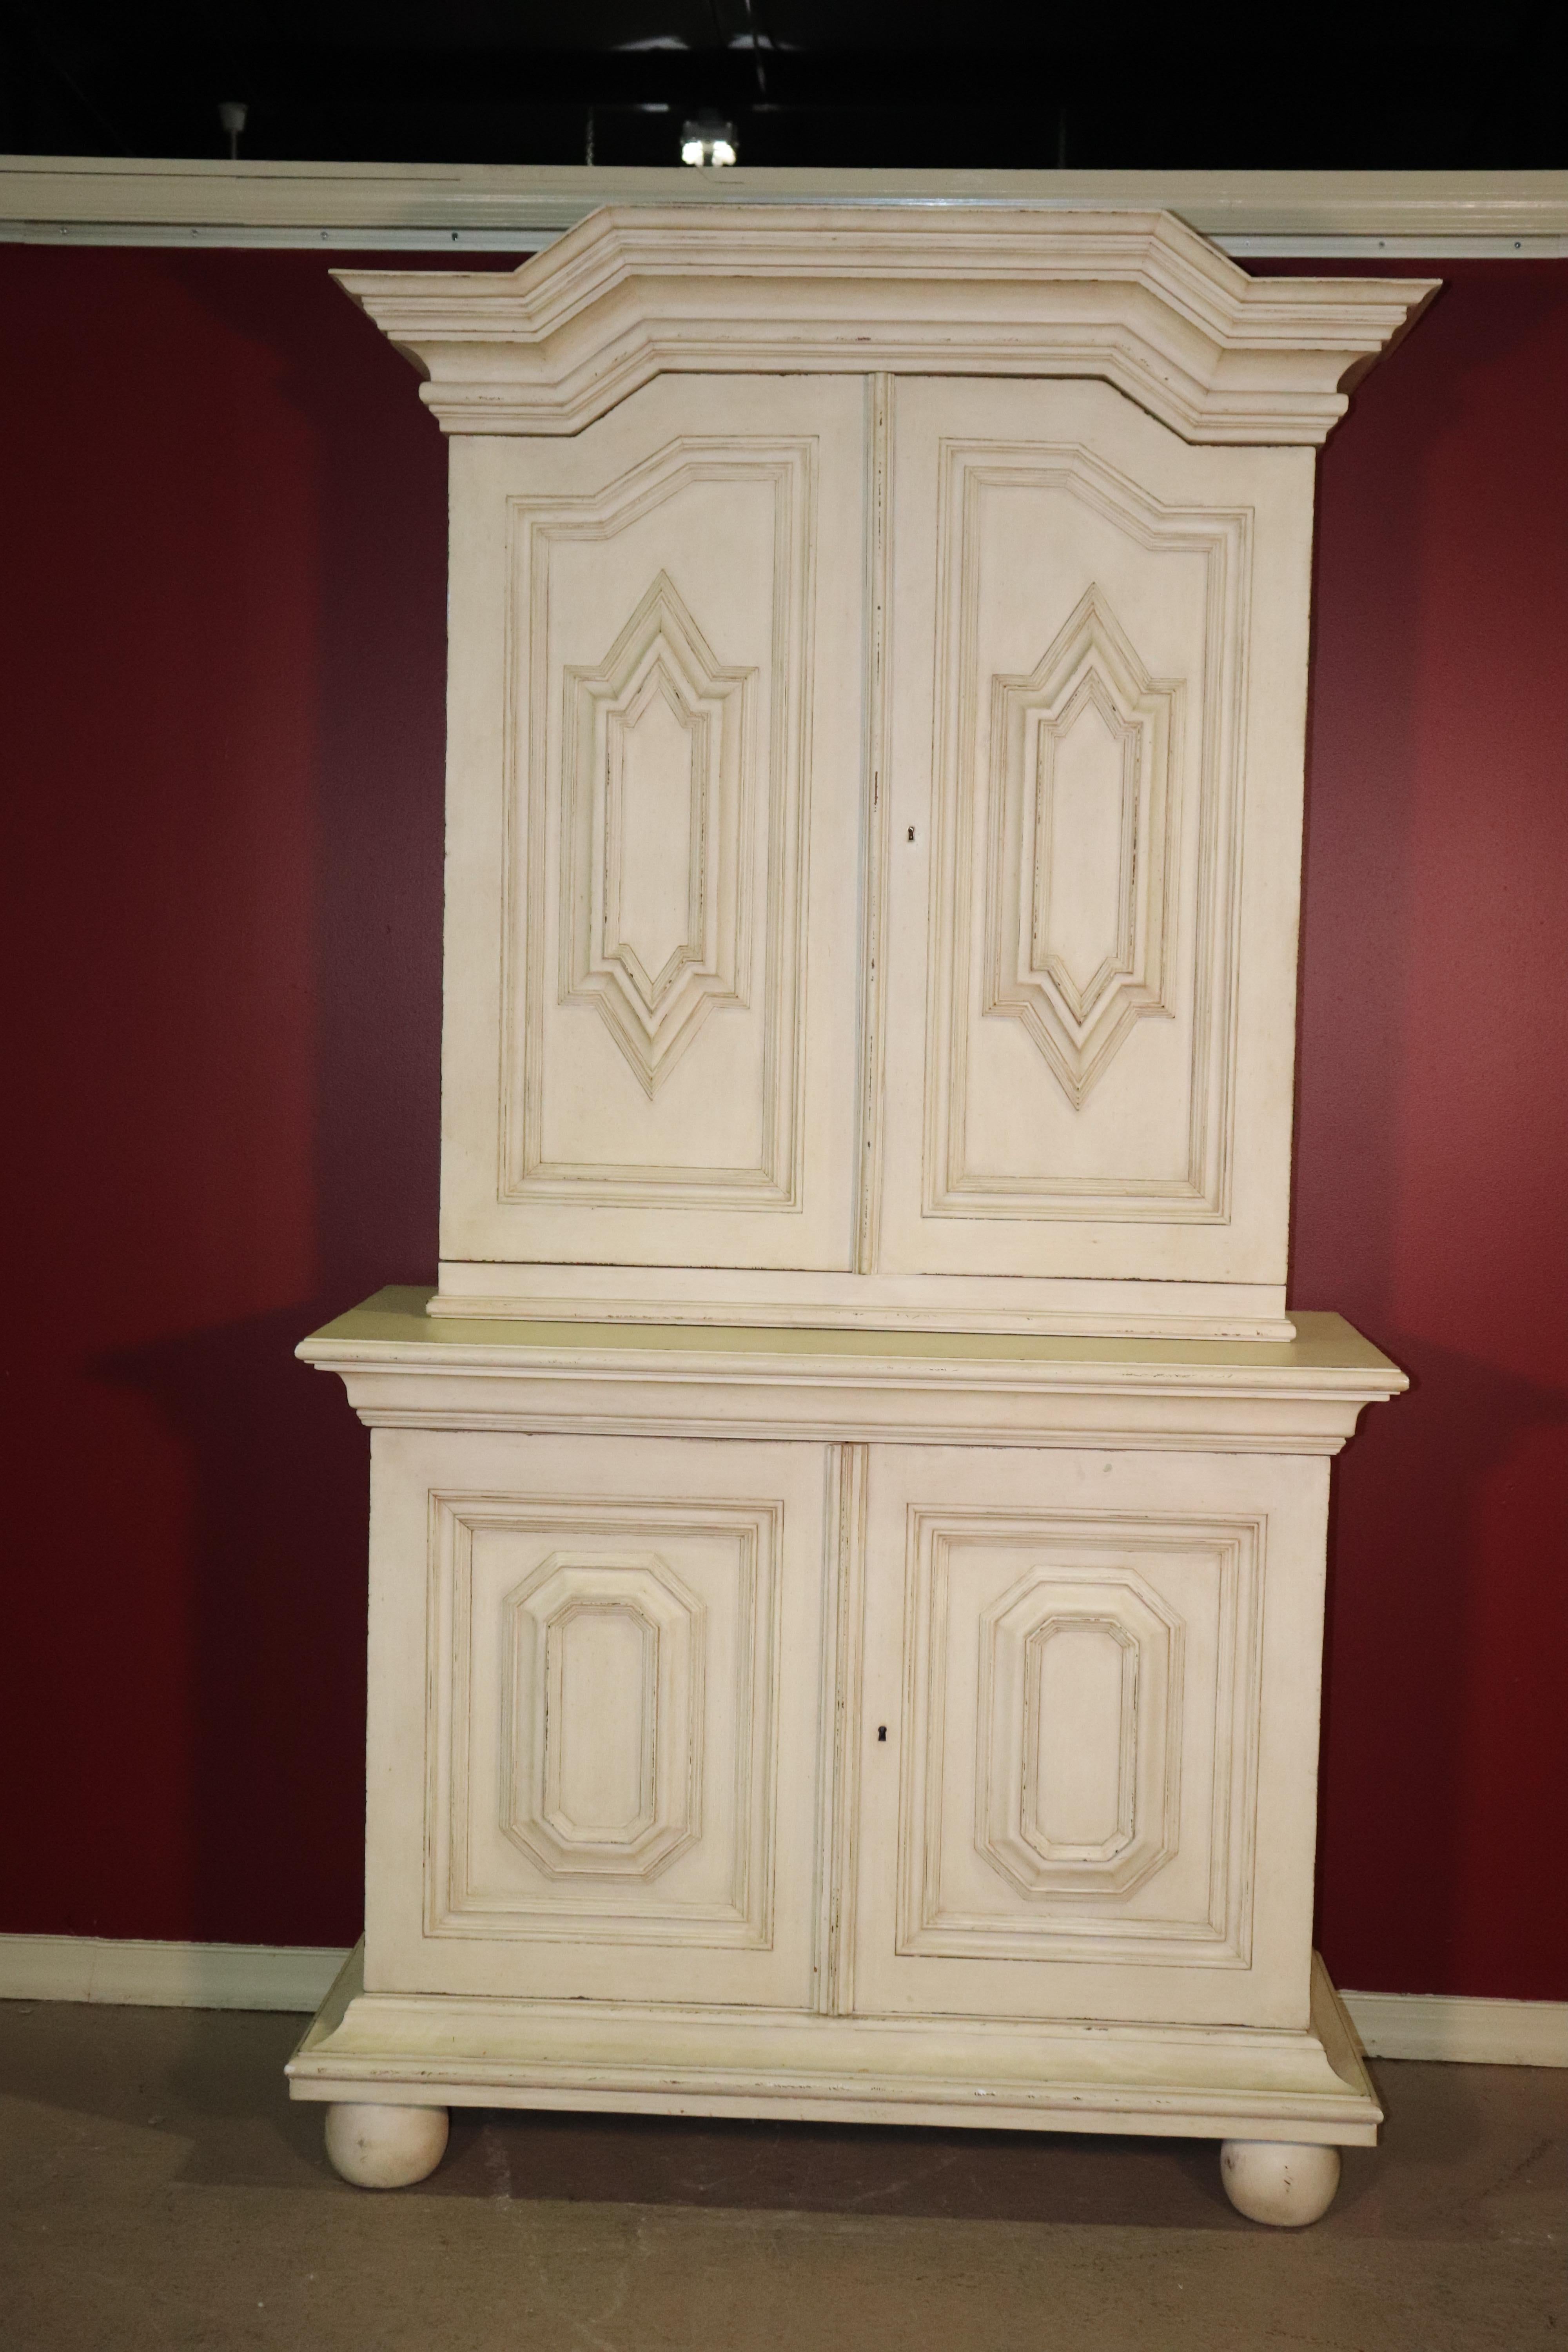 This is a gorgeous antique distressed painted Gustavian armoire or wardrobe. The cabinet is made of a solid hardwood and has removable shelving and a great distressed white finish. The cabinet is not especially old at 50 years, but looks antique.